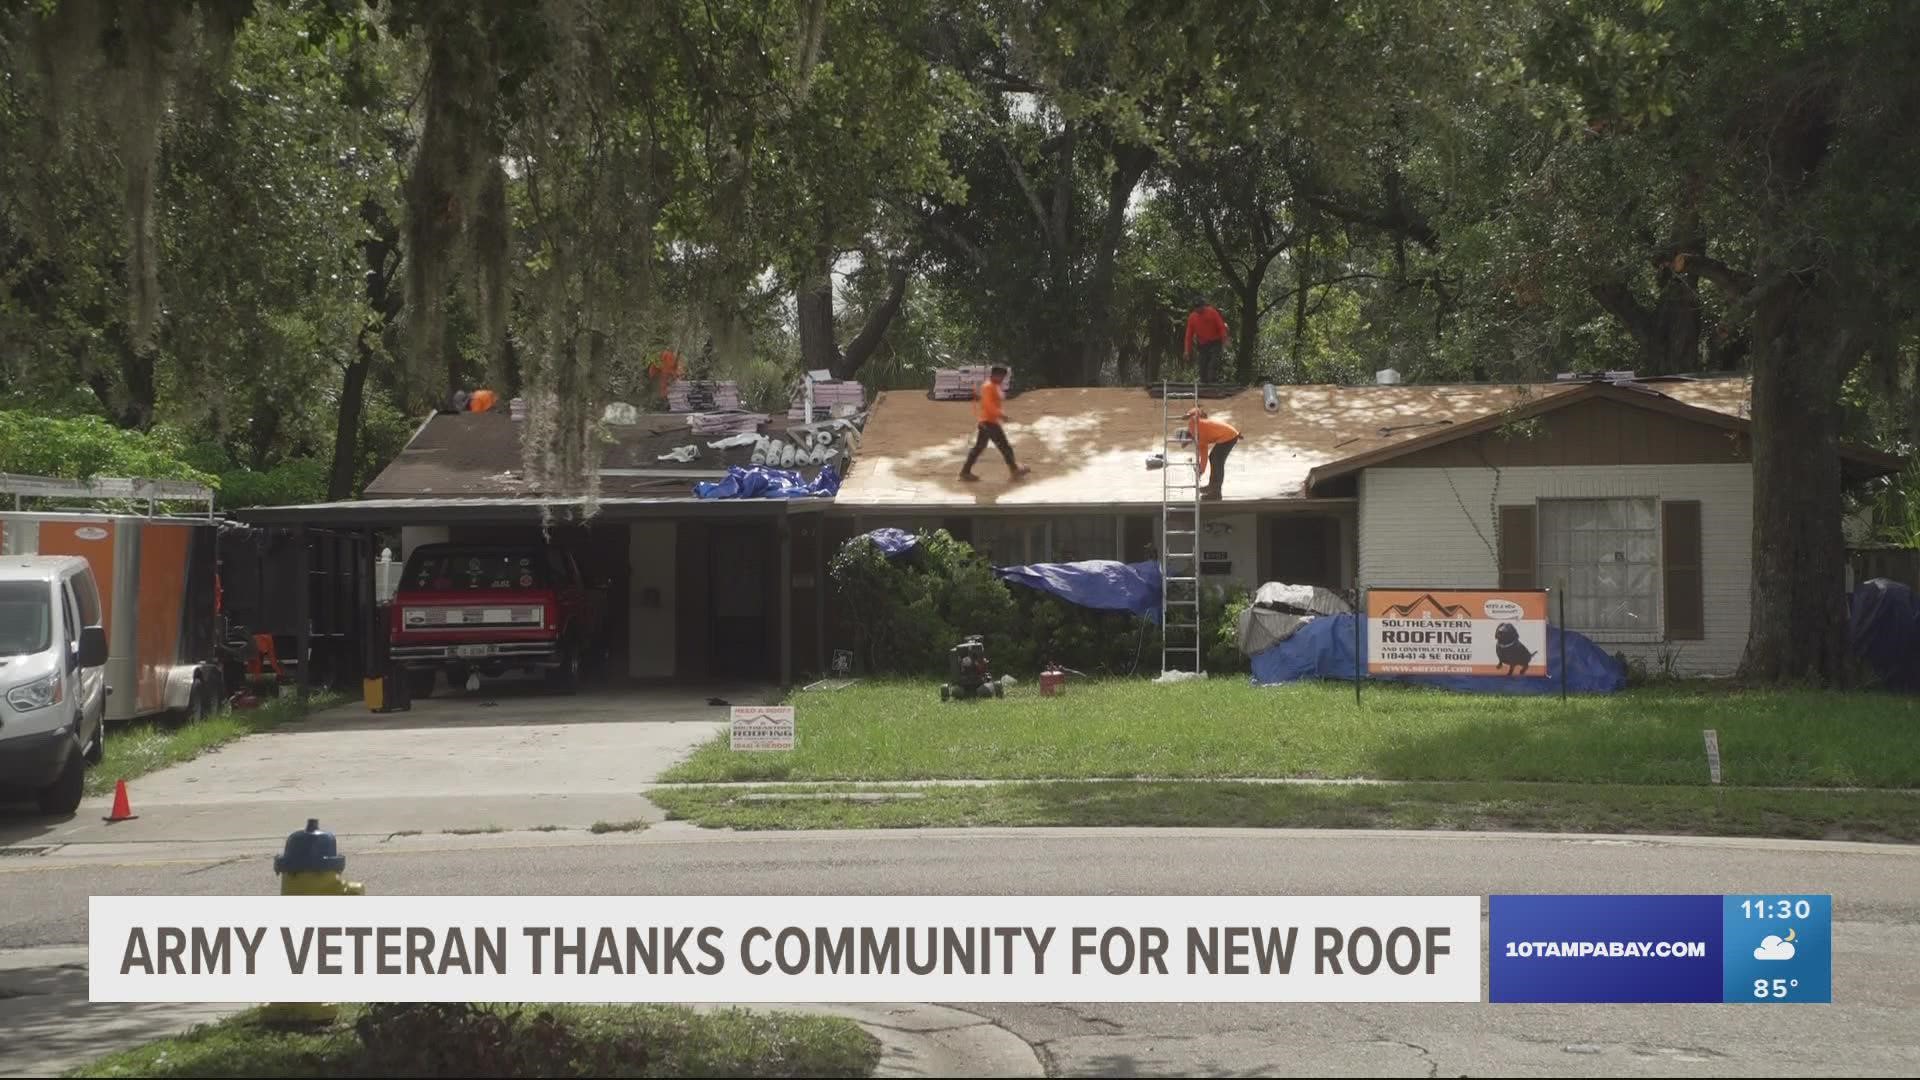 After facing some financial challenges to fix his leaking roof, Bob Nelson thanks volunteers and donations that helped put a new roof over his head.